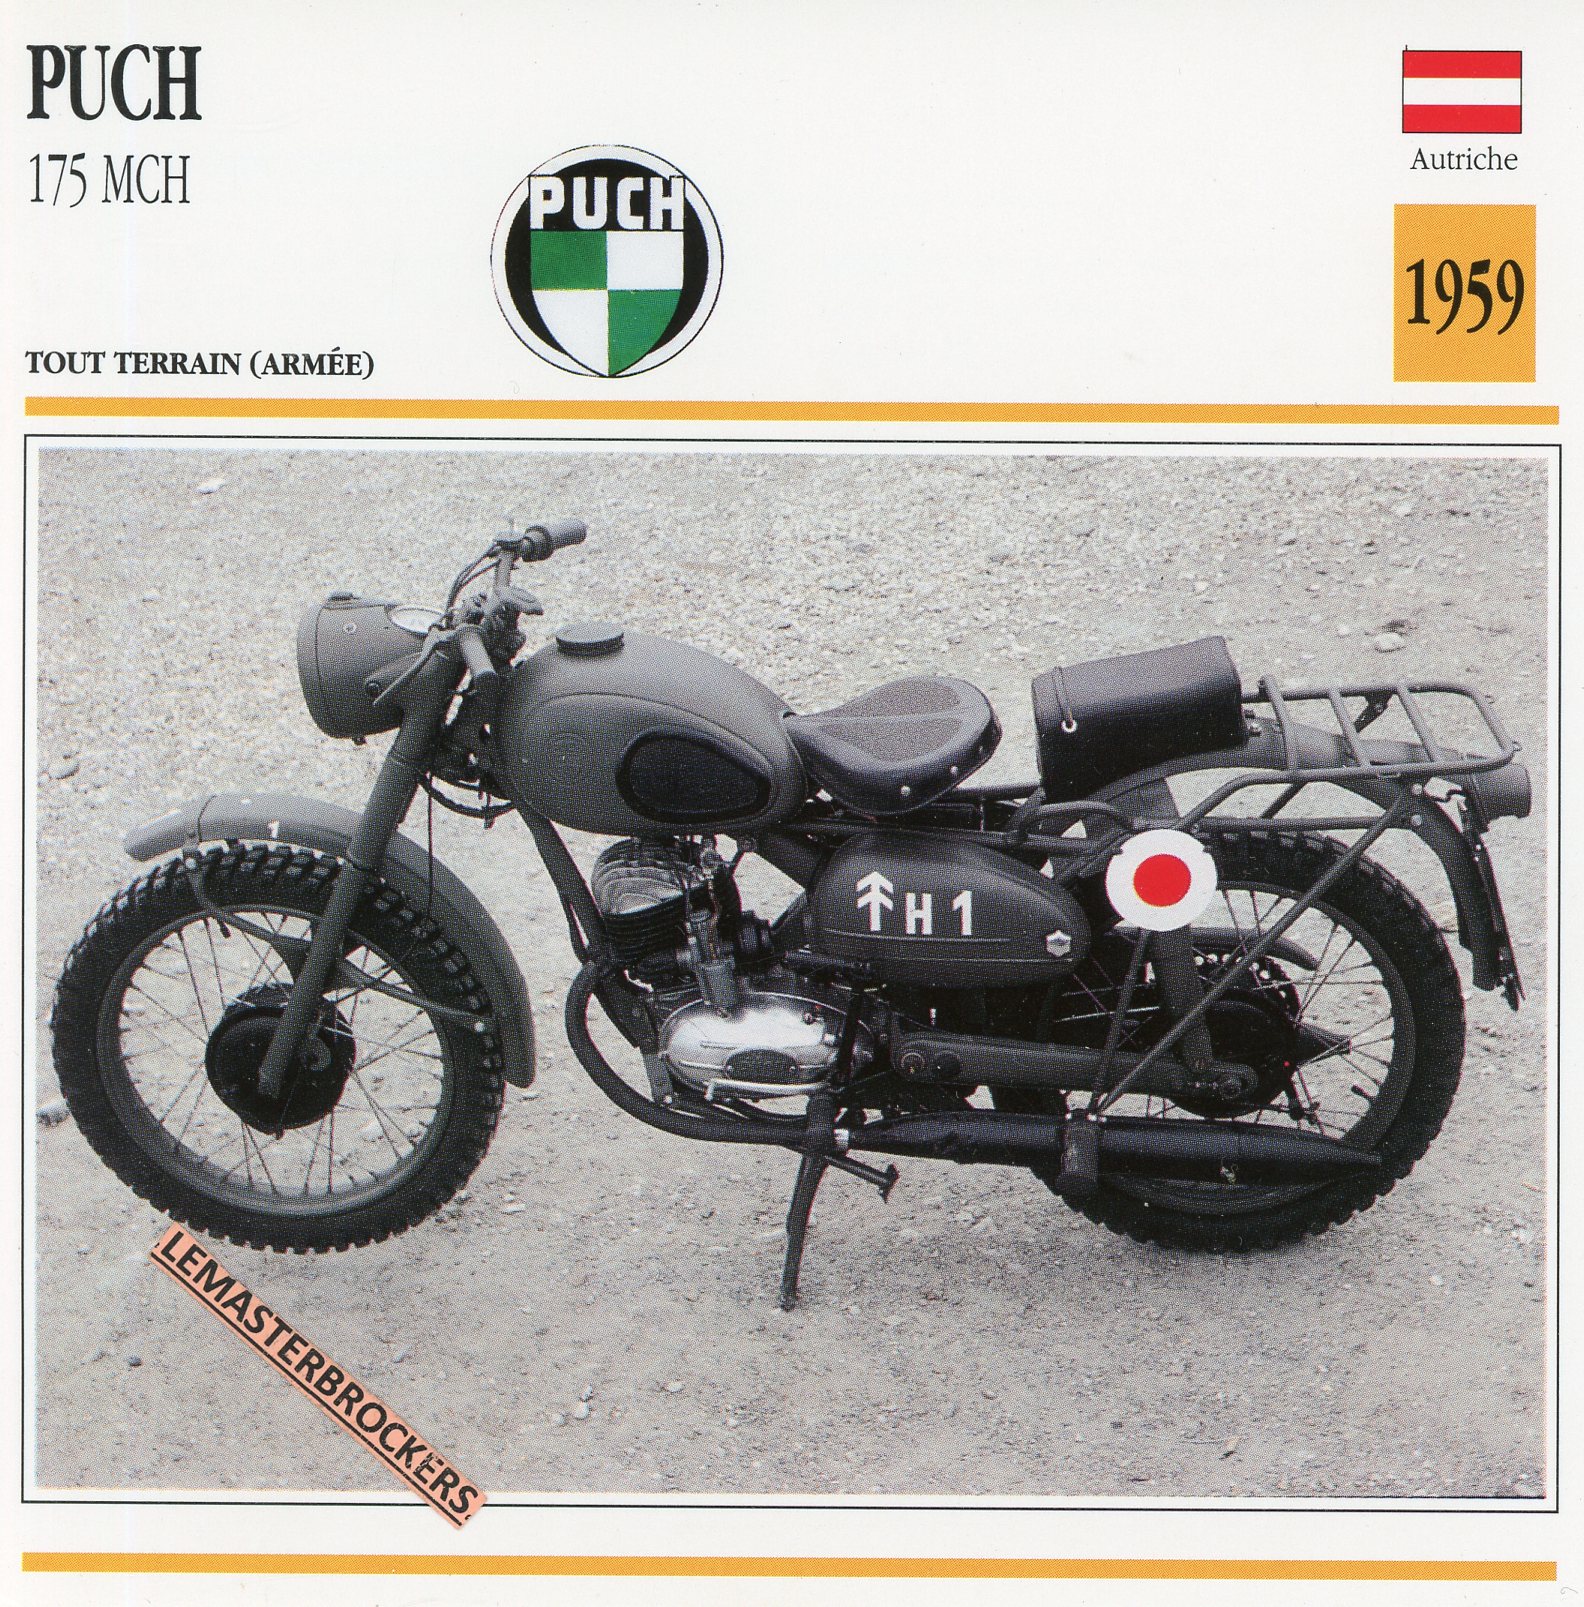 PUCH-175-MCH-1959-FICHE-MOTO-MOTORCYCLE-CARDS-ATLAS-LEMASTERBROCKERS